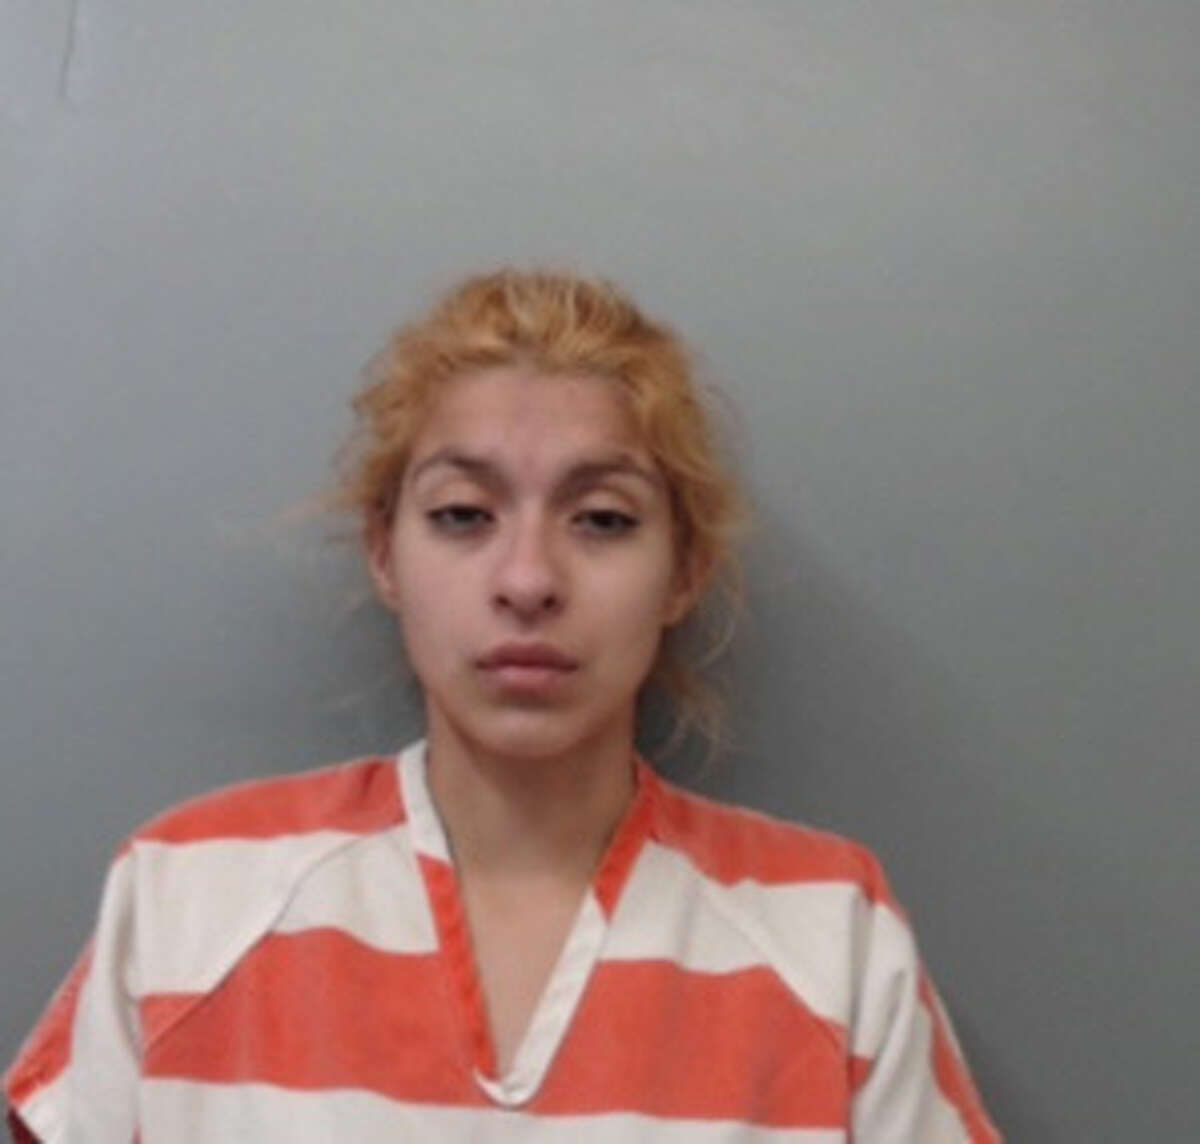 Ana Karen Herrera, 22, was charged with unauthorized use of a vehicle and theft.